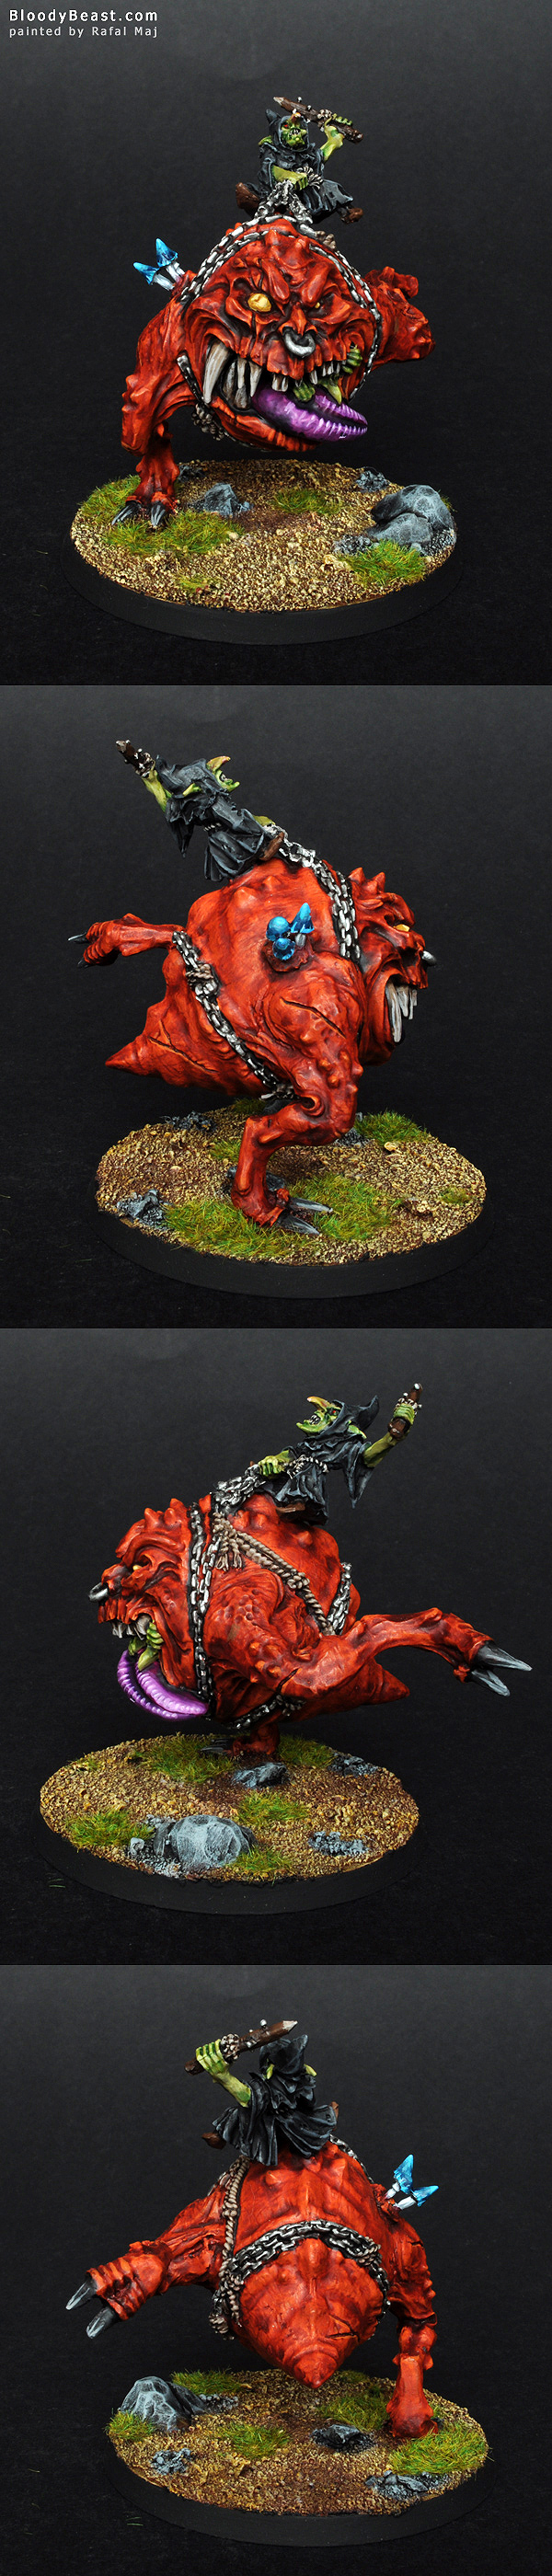 Orcs and Goblins Mangler Squig painted by Rafal Maj (BloodyBeast.com)